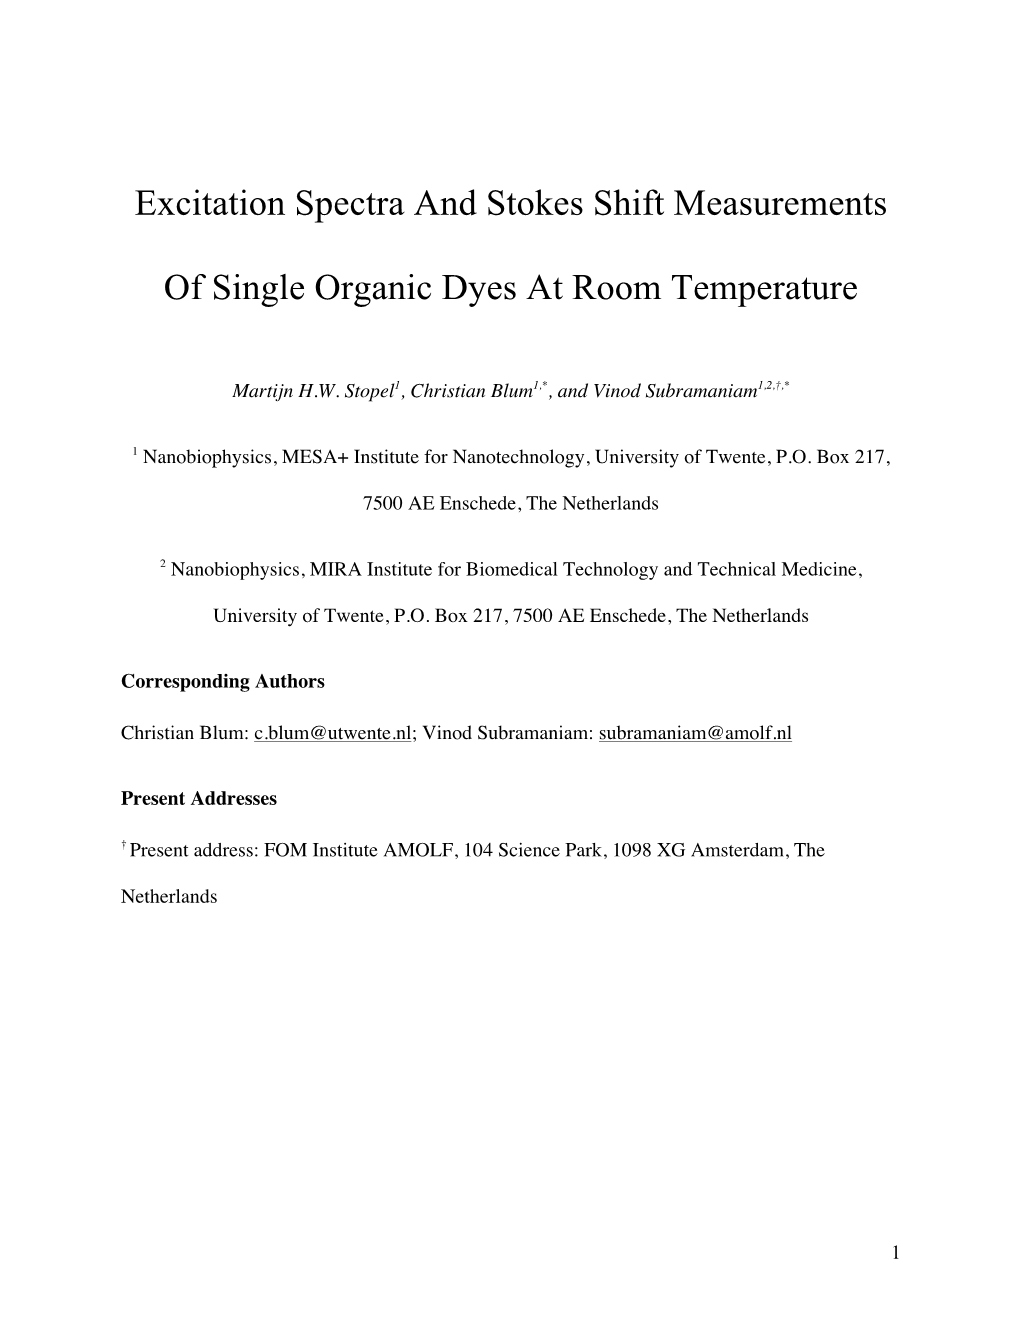 Excitation Spectra and Stokes Shift Measurements